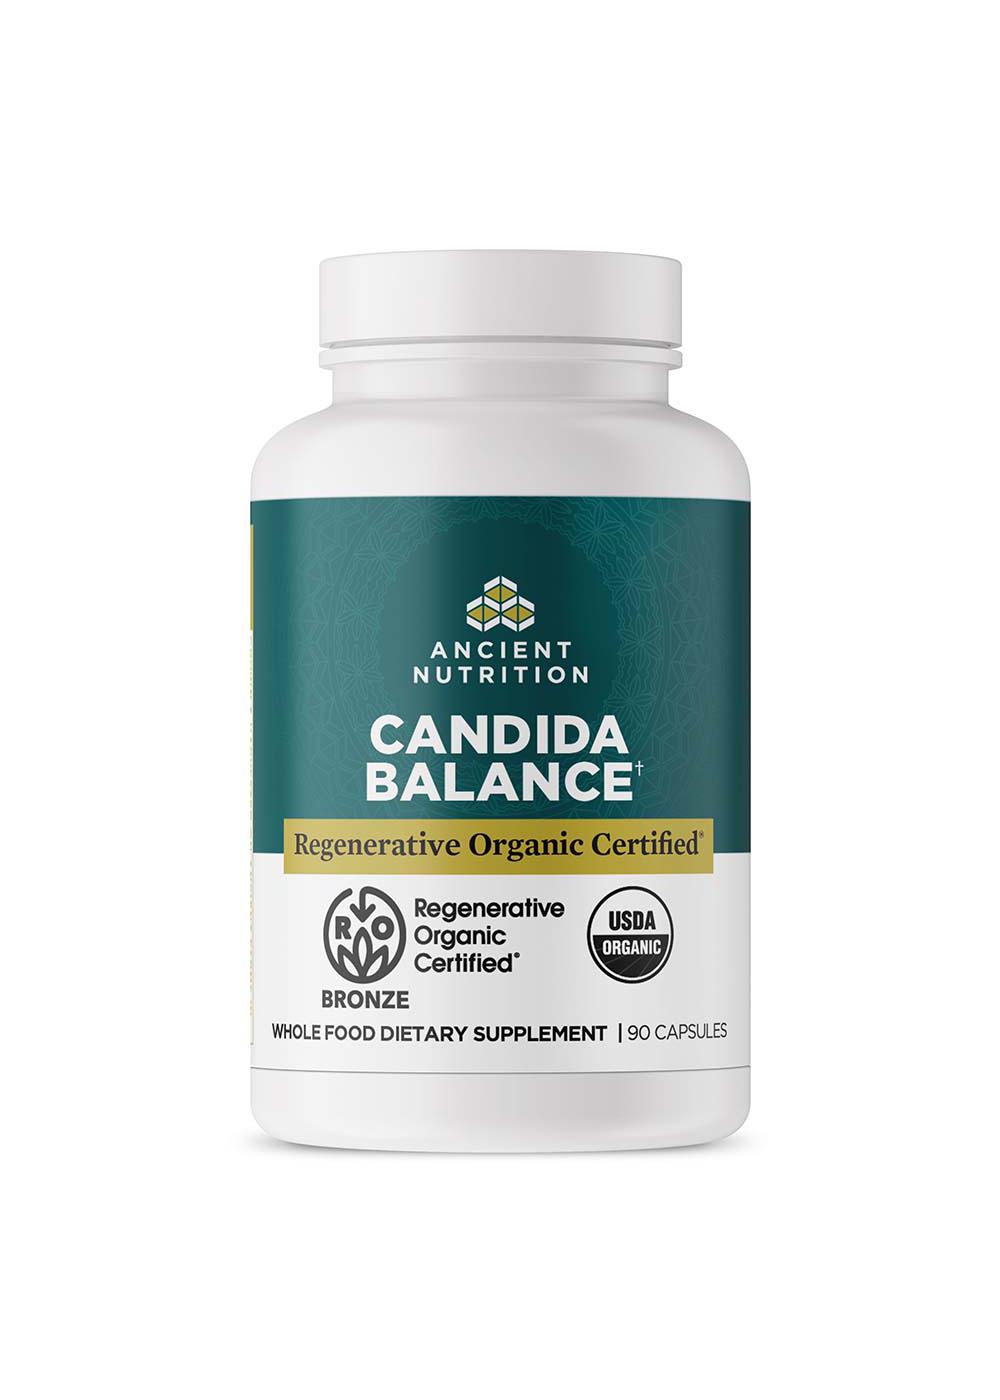 Ancient Nutrition Candida Balance Capsules; image 4 of 5